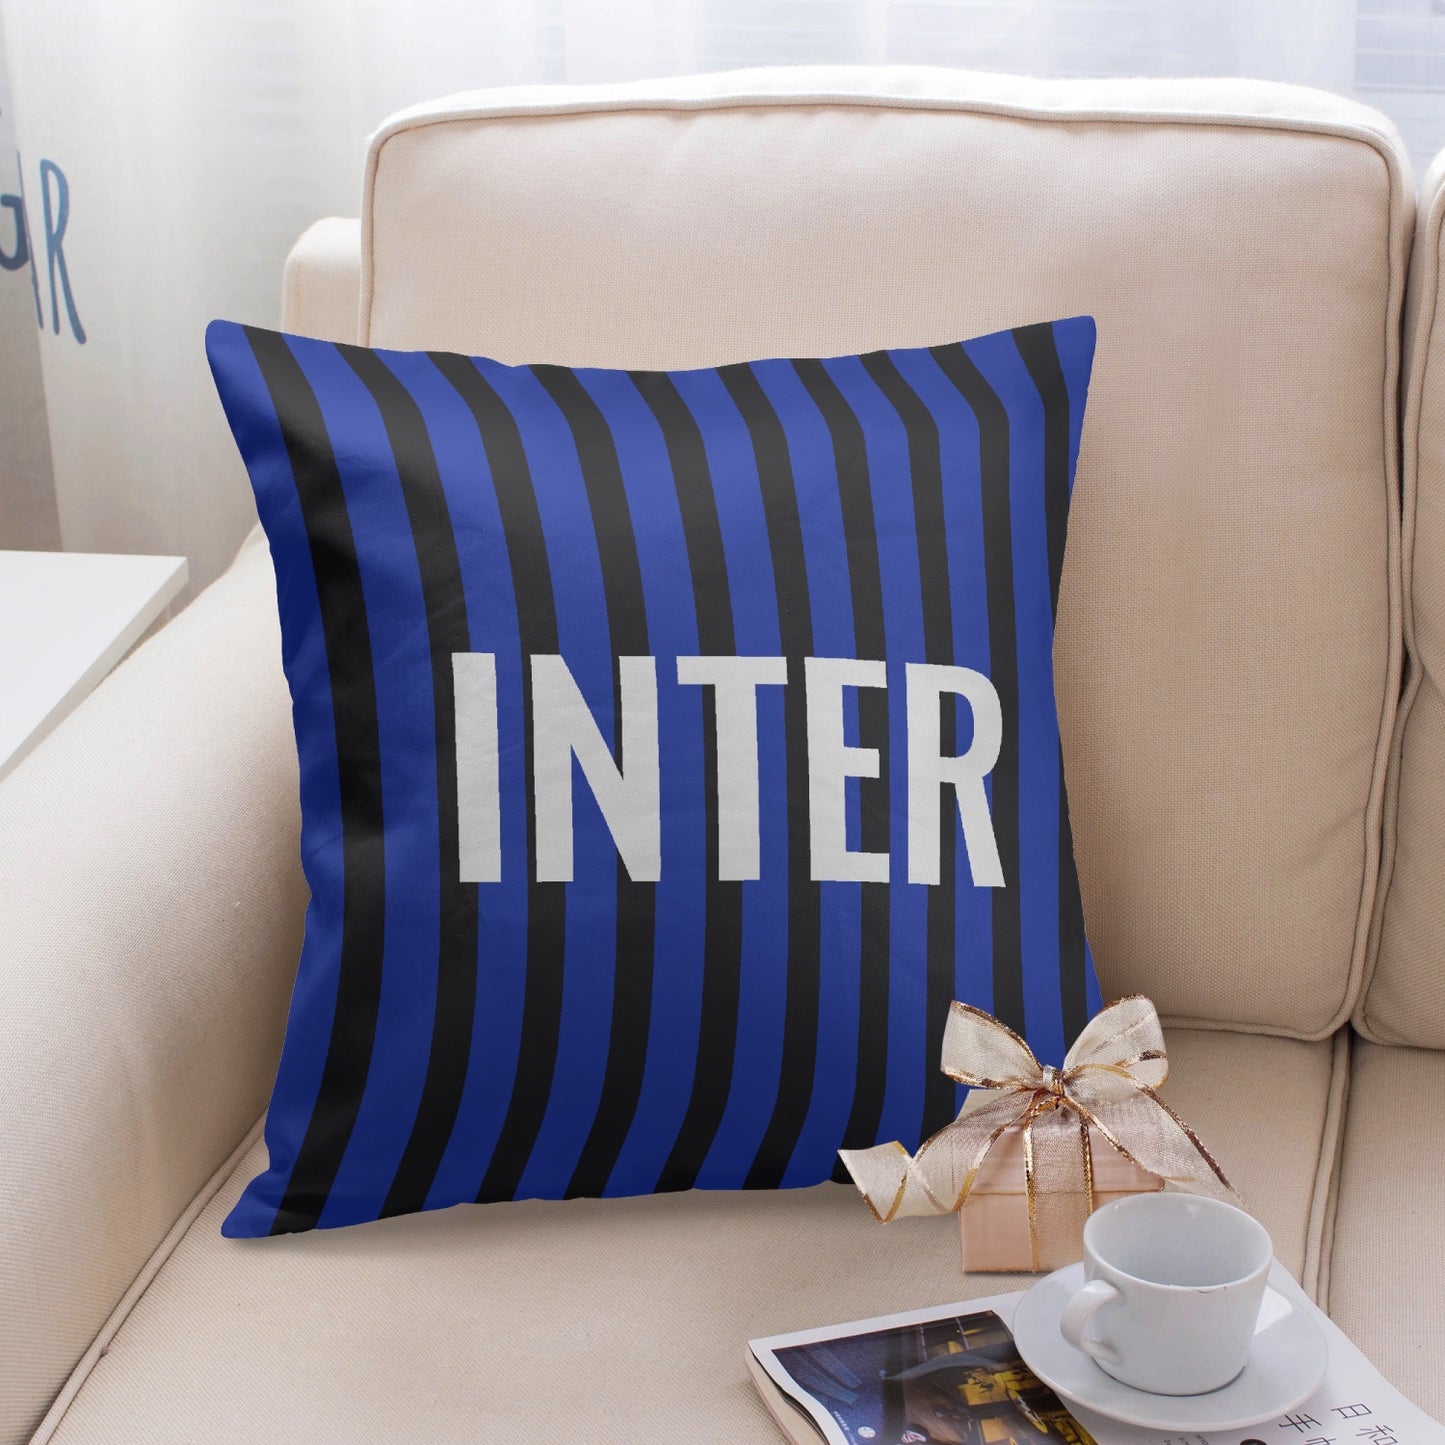 Inter Pillow Cover